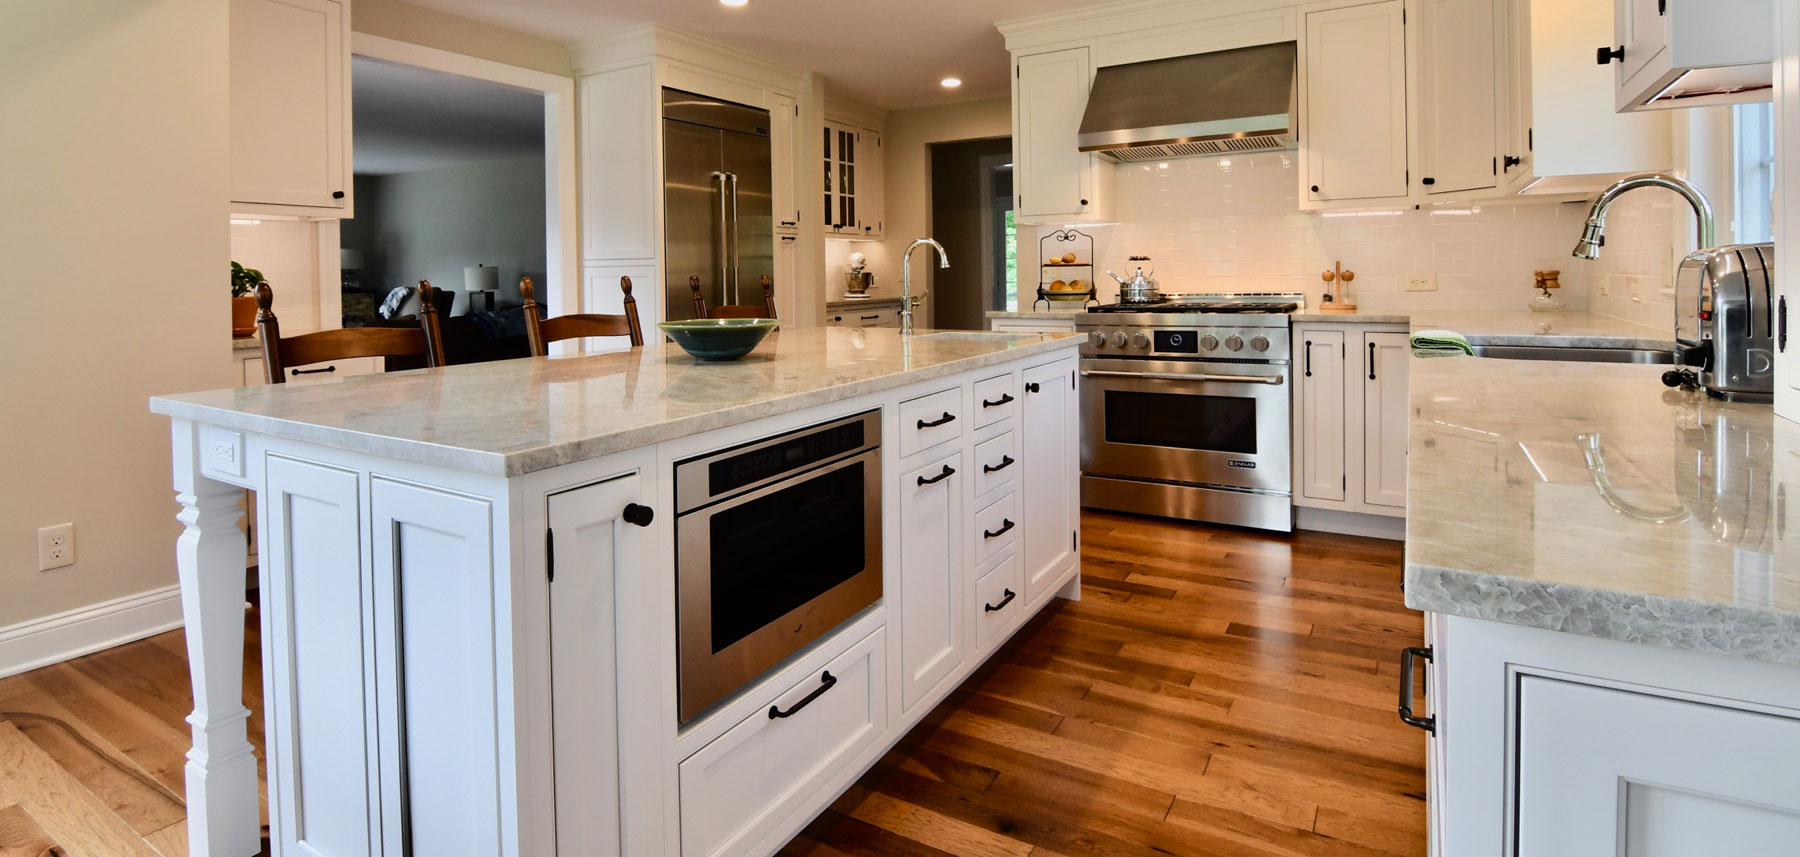 Ways to Make Your Kitchen More Appealing